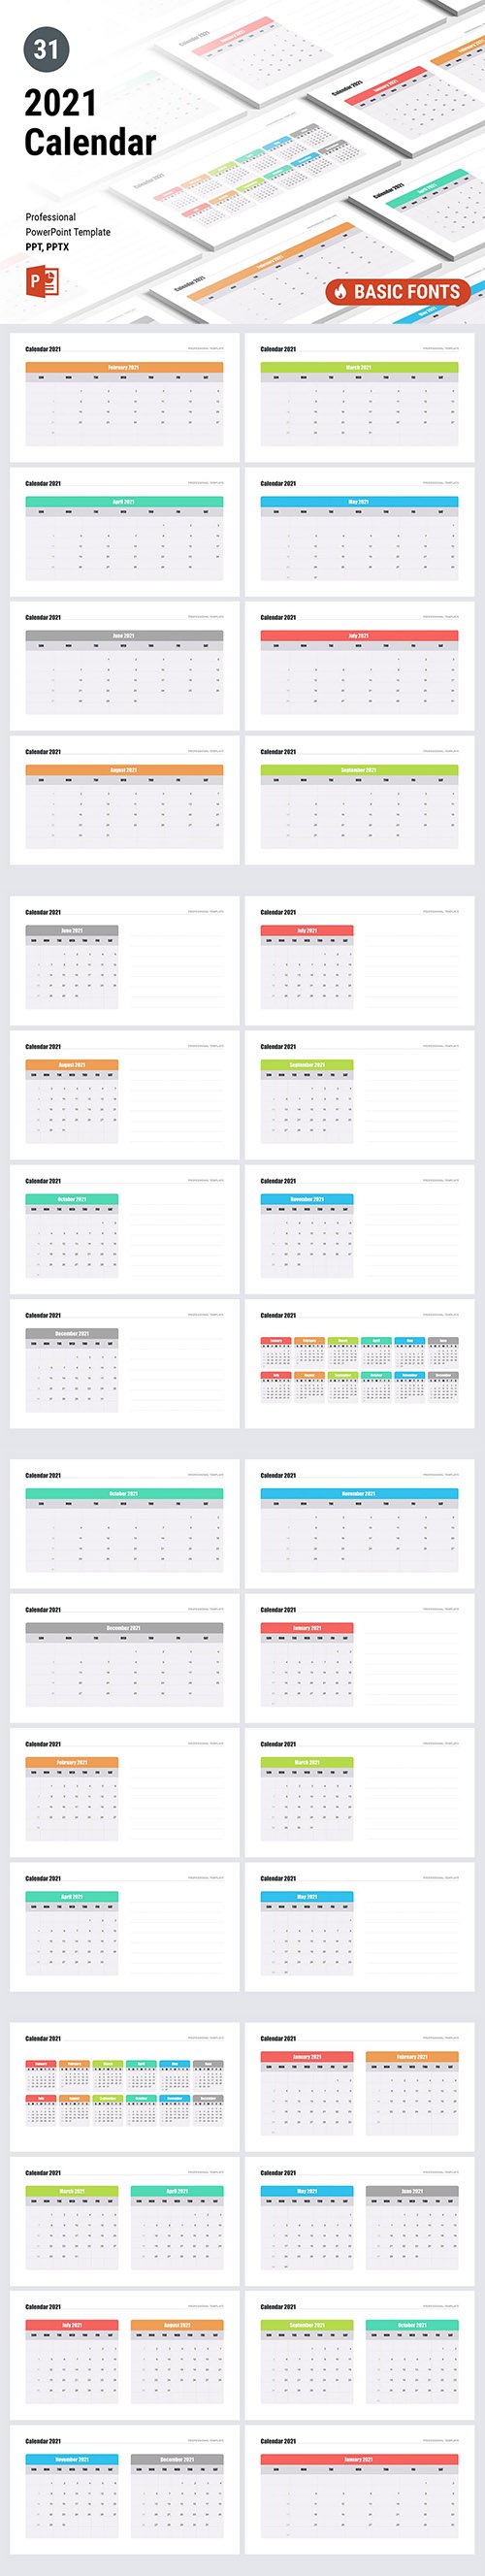 Calendar 2020 for PowerPoint and Keynote